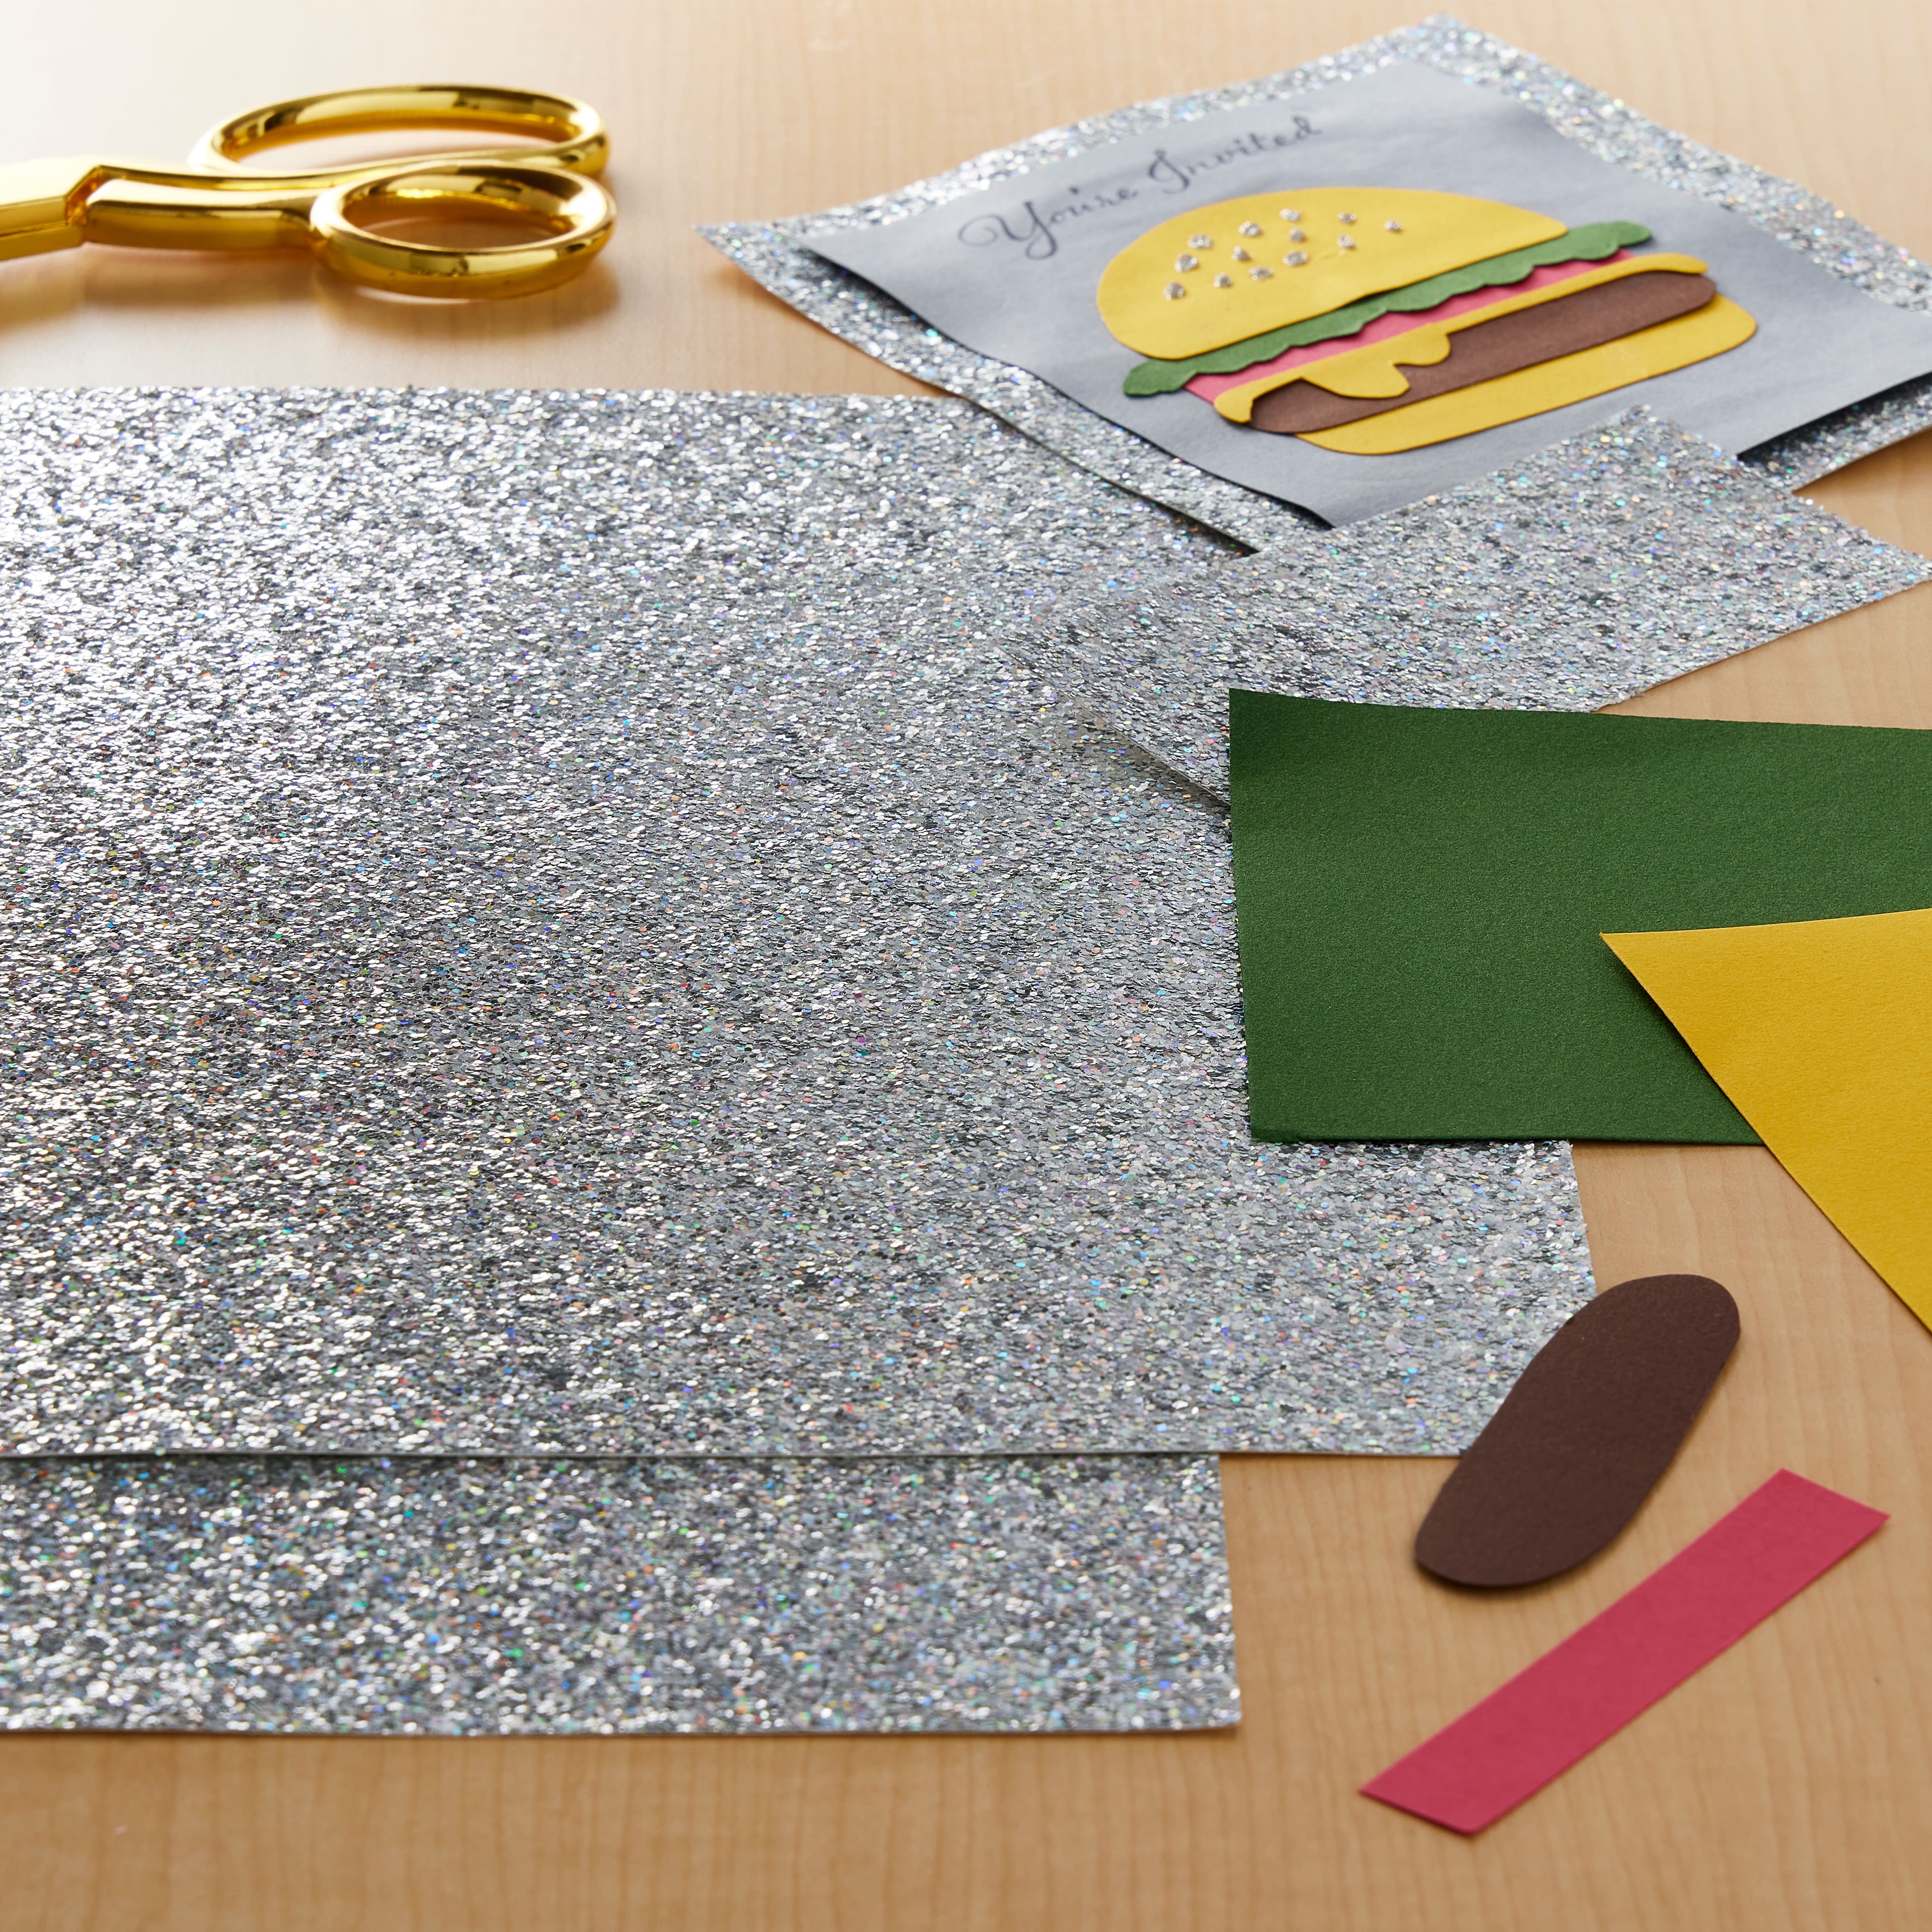 Deal on Glitter Cardstock @Michaels Stores #papercrafters #deal